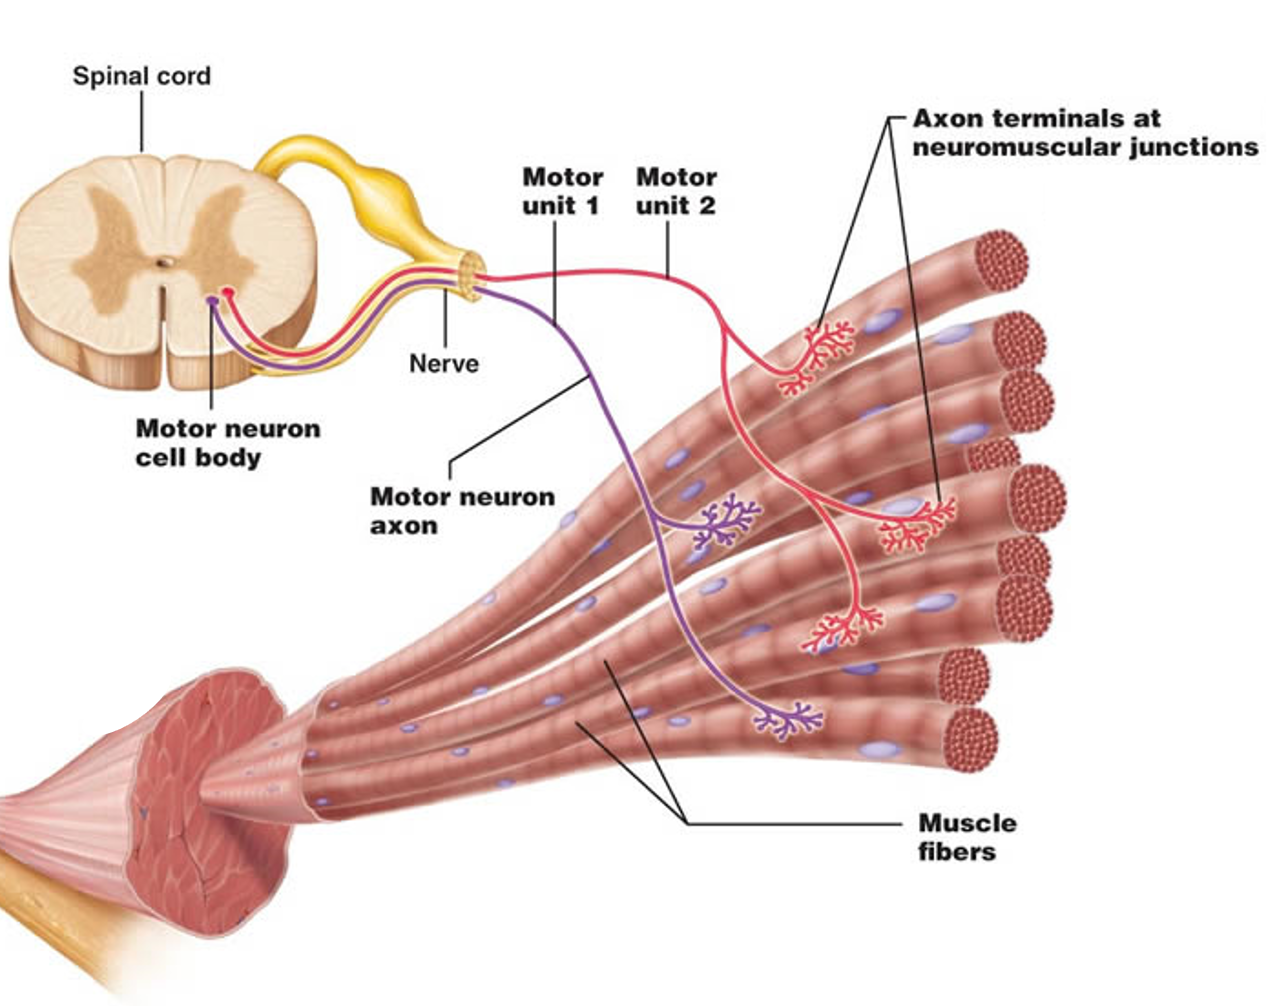 <p><mark data-color="blue">Neuromuscular junctions: axon terminal</mark></p><p>Can you label, describe and explain what this diagram is/shows?</p>